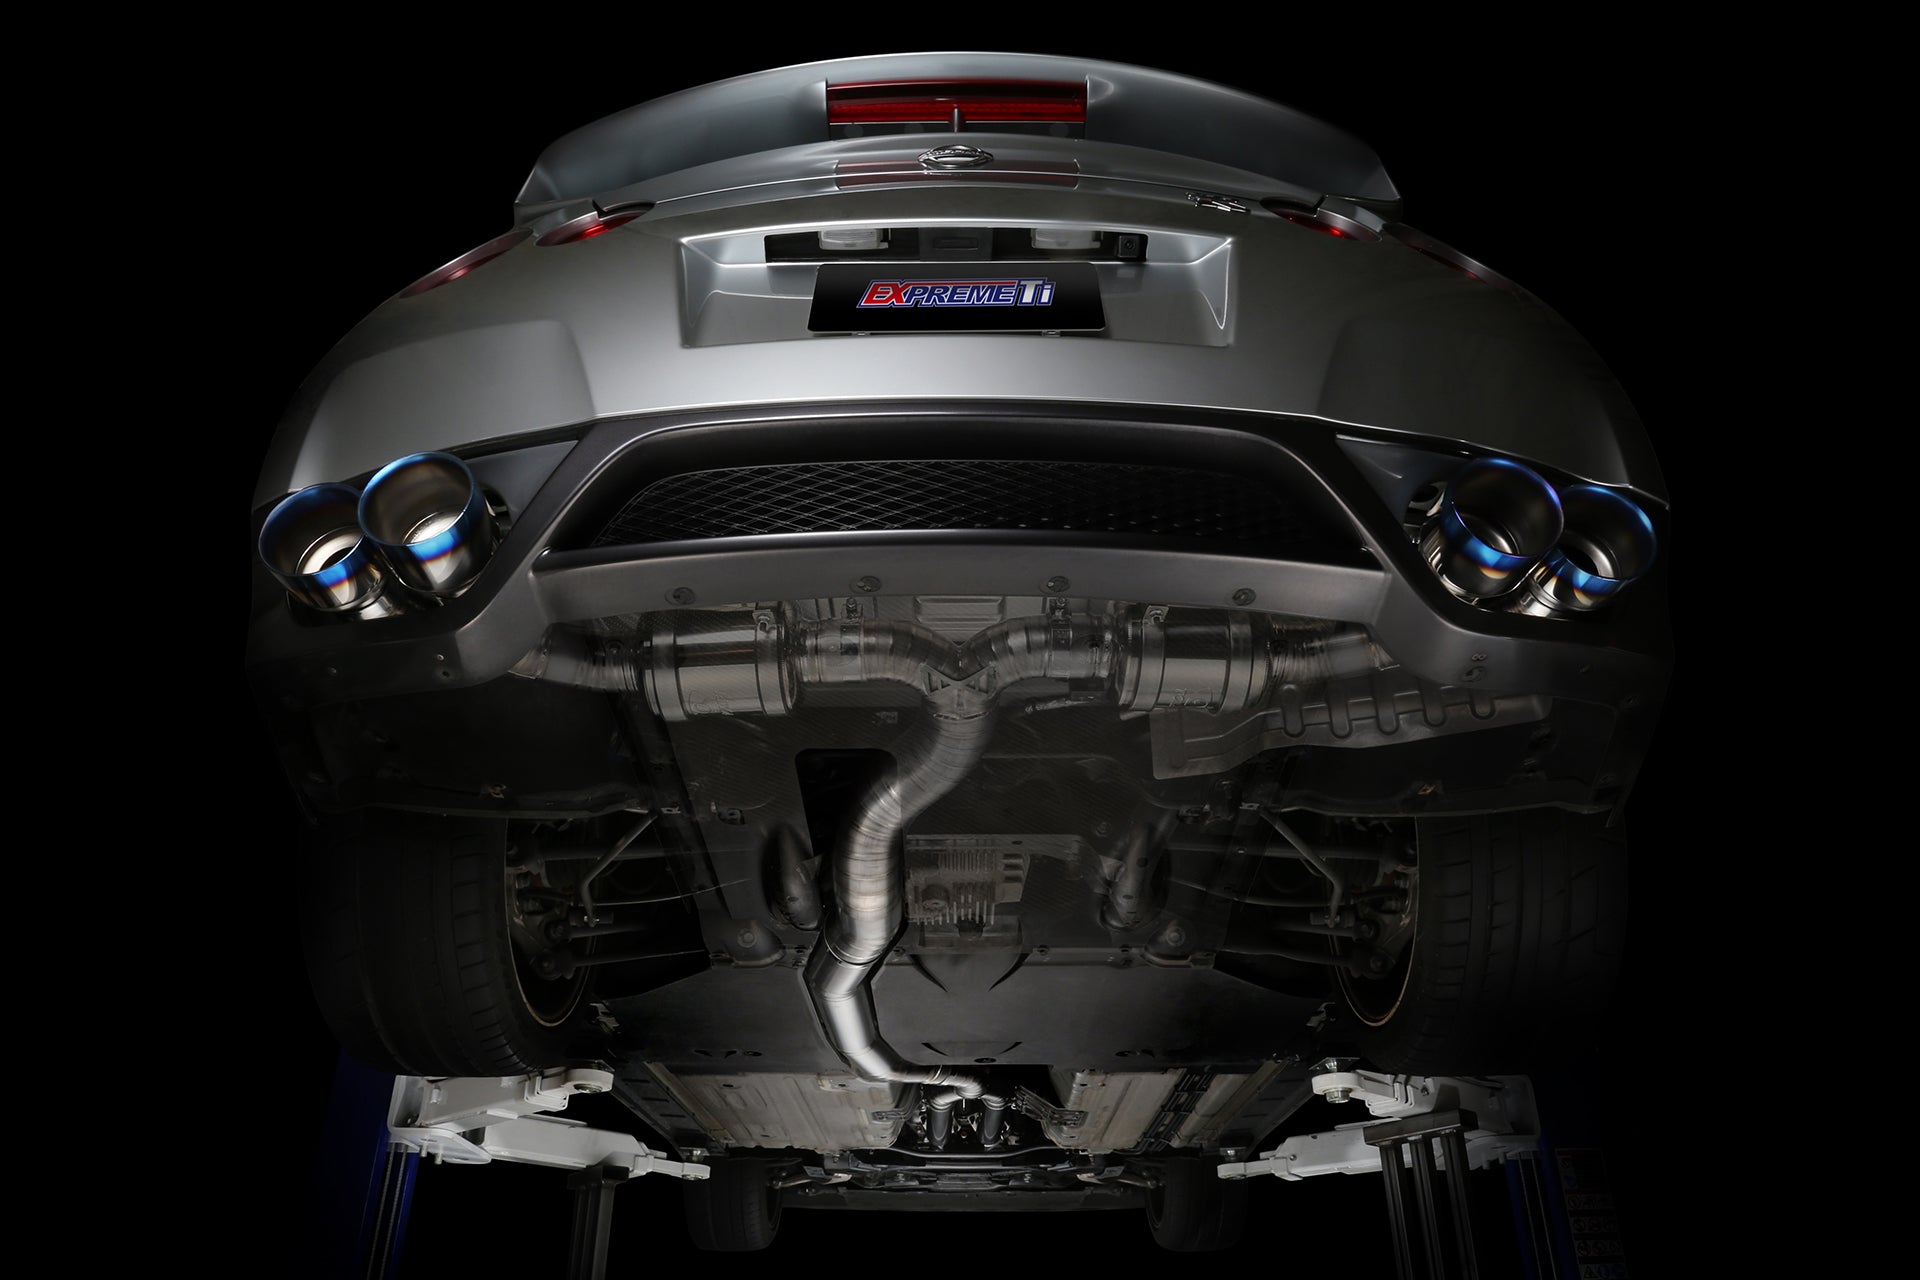 TOMEI TB6070-NS01A Expreme Ti exhaust (102 mm) include Y-pipe for NISSAN R35 GT-R (titanium) Photo-1 